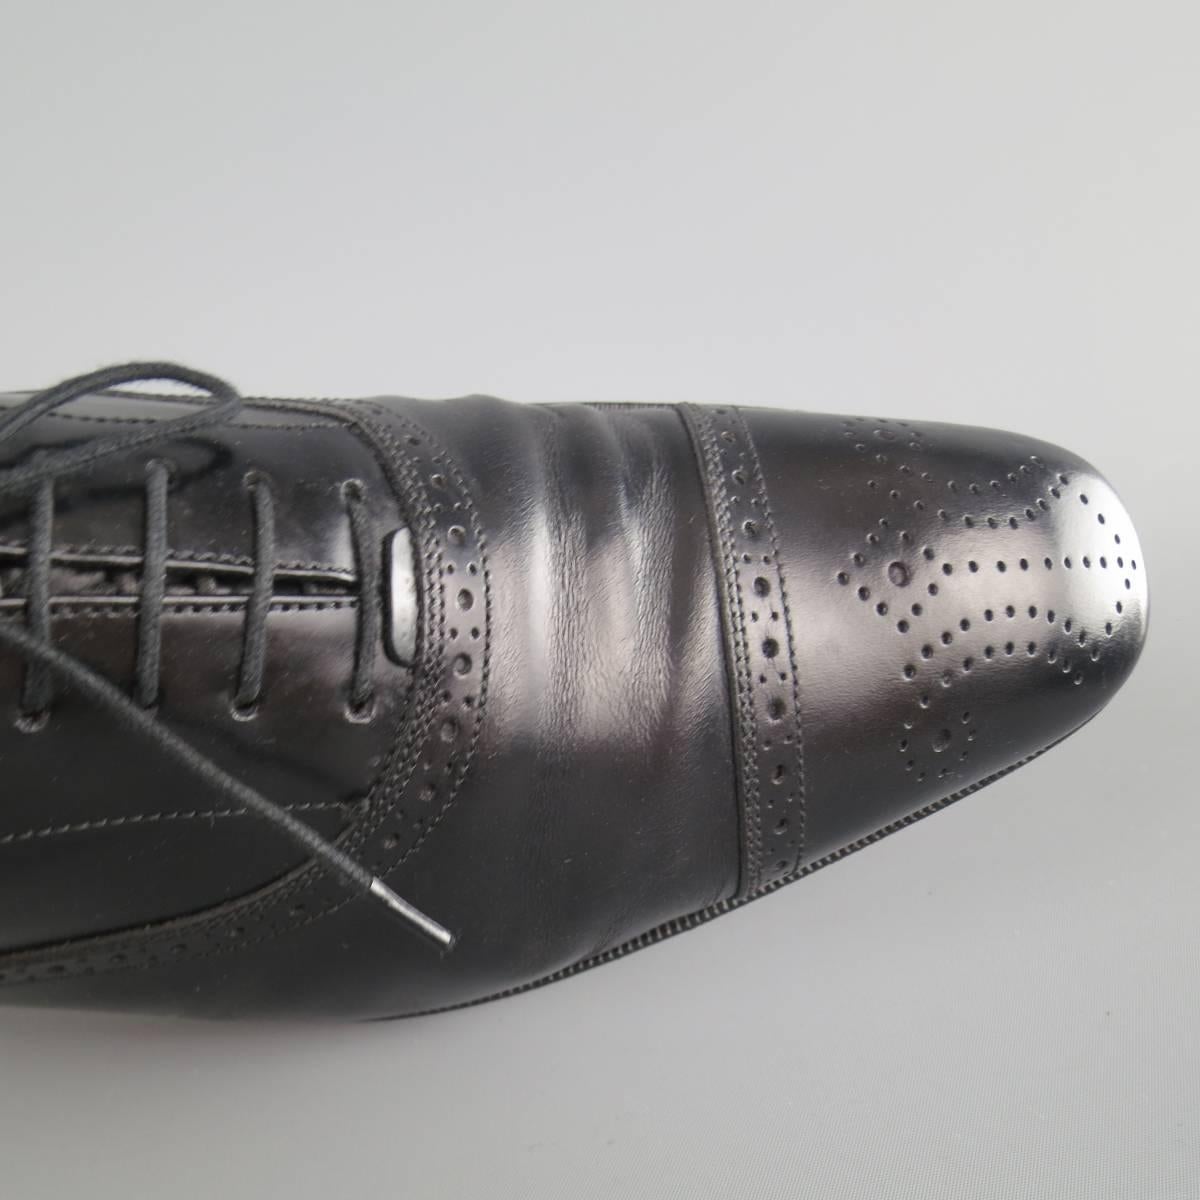 SALVATORE FERRAGAMO Lace Up Shoes consists of leather material in a black color tone. Designed with a pointed round toe front, wingtip detail and perforated pattern. Leather sole with rubber heel. Made in Italy.
 
Good Pre-Owned Condition 
Marked